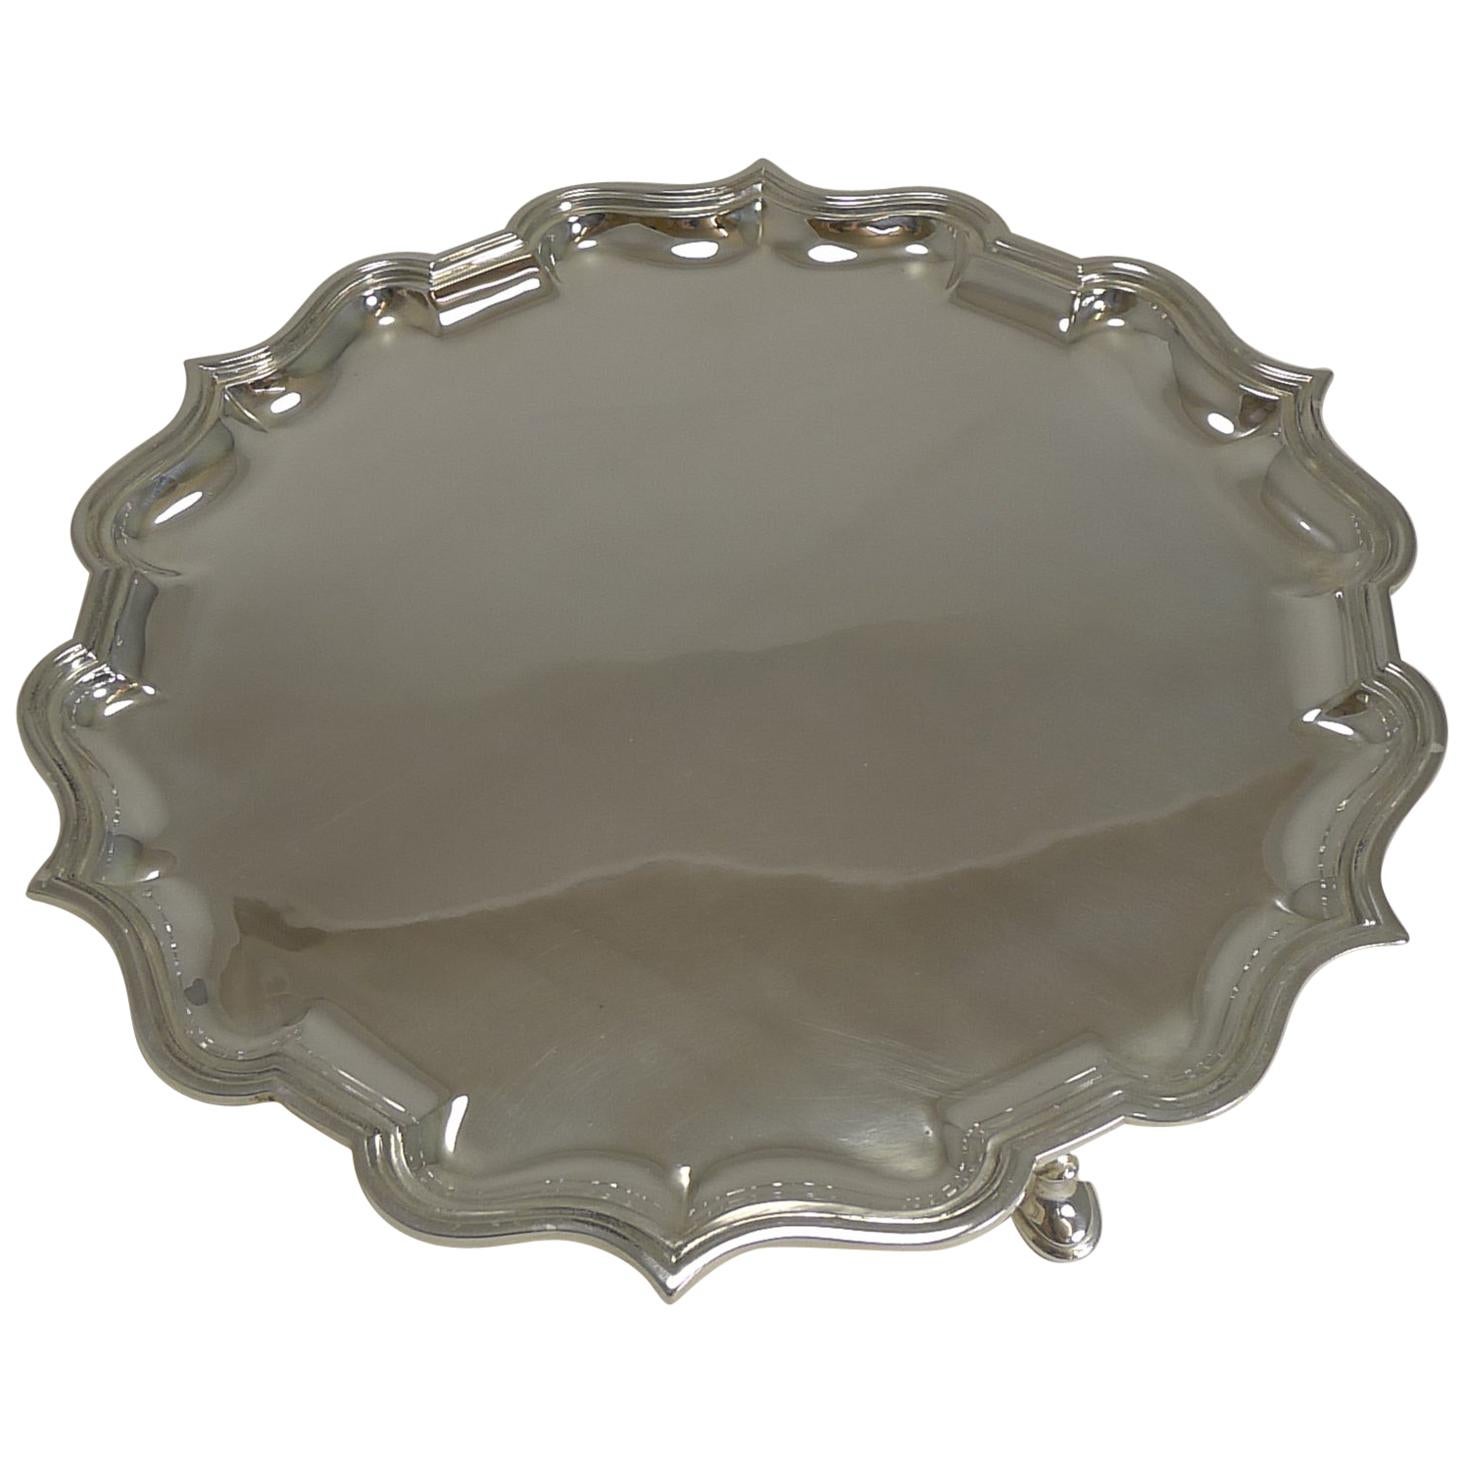 Antique English Silver Plated Salver / Tray by Elkington, 1911